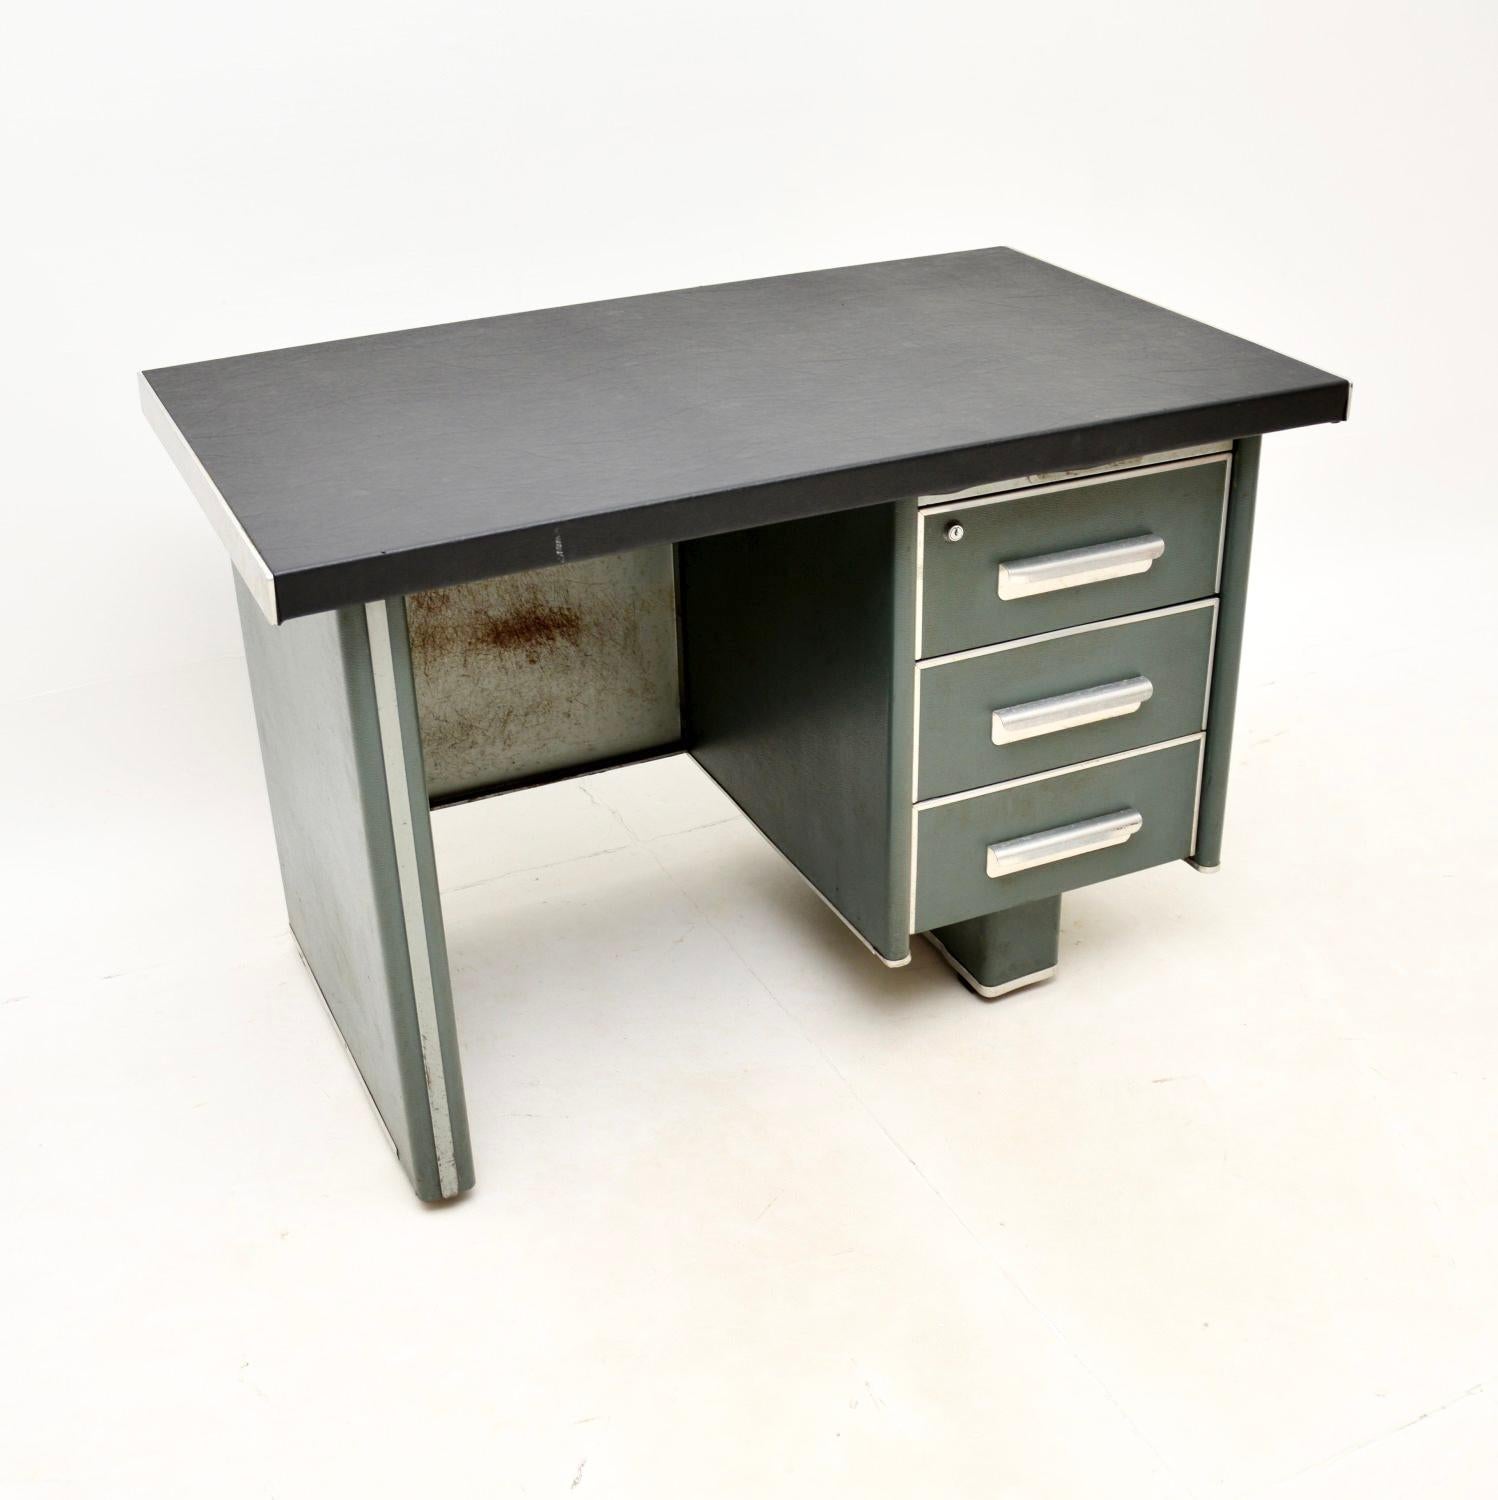 Mid-20th Century Vintage Industrial Steel Desk and Chair